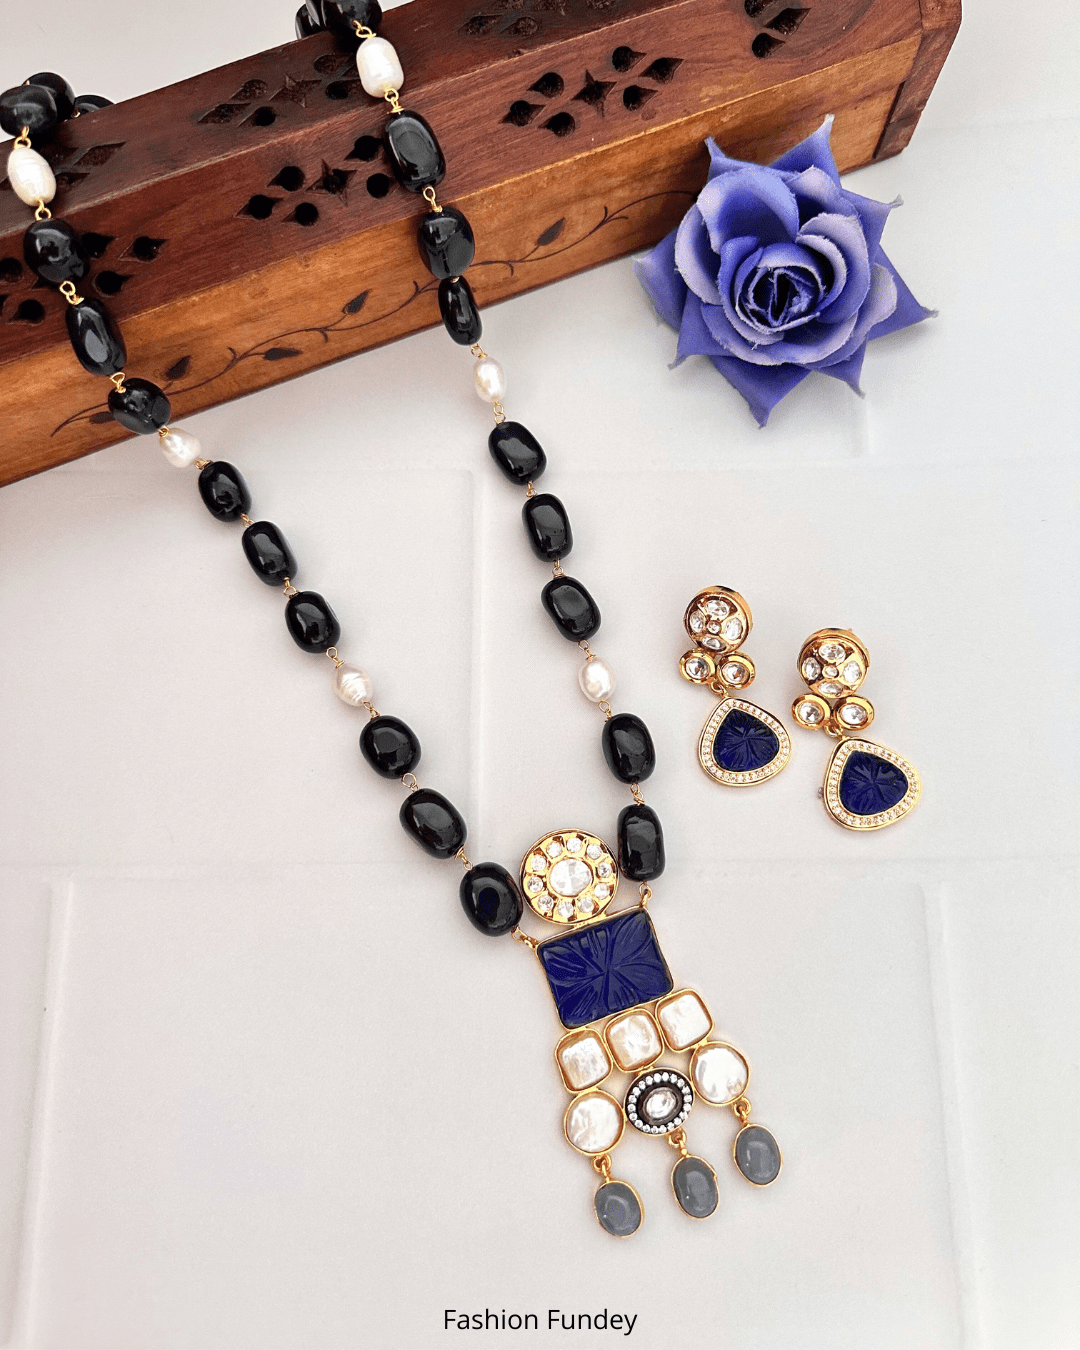 Youth Dark Blue Silk Thread Necklace with Grand Pendant and Earrings